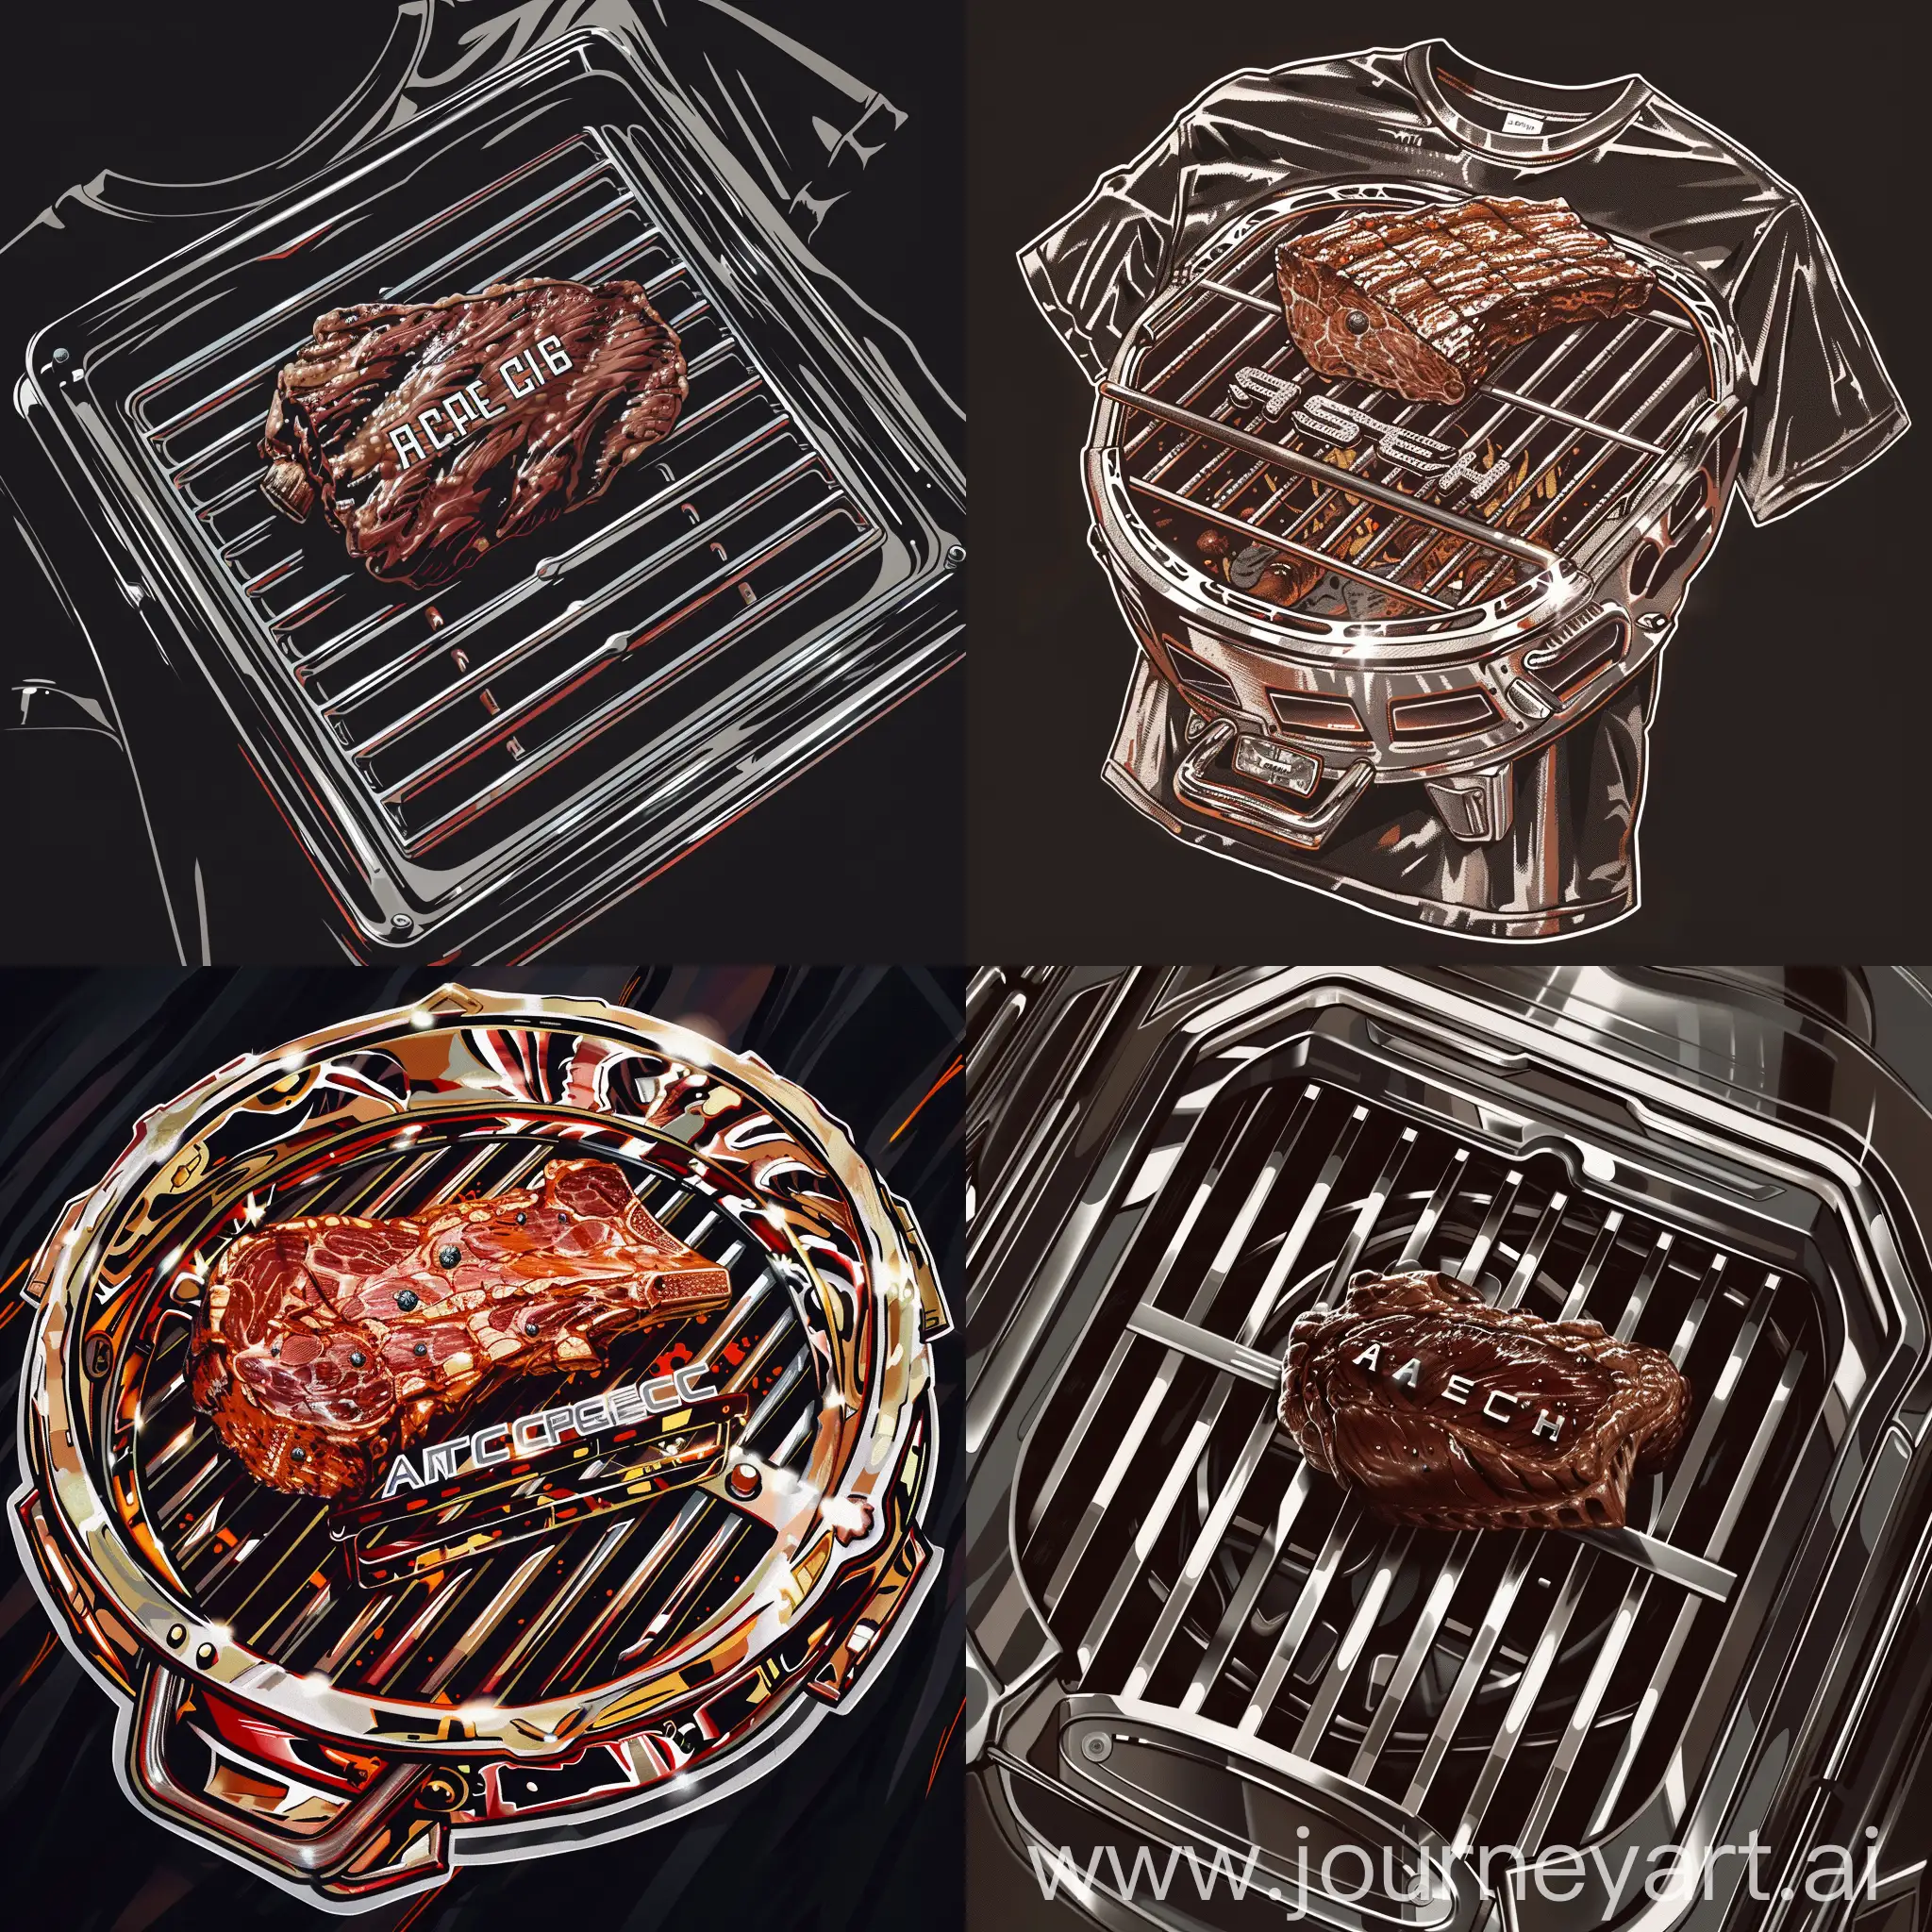 Asteroid-Brisket-Barbecue-TShirt-Chrome-Style-Grill-Design